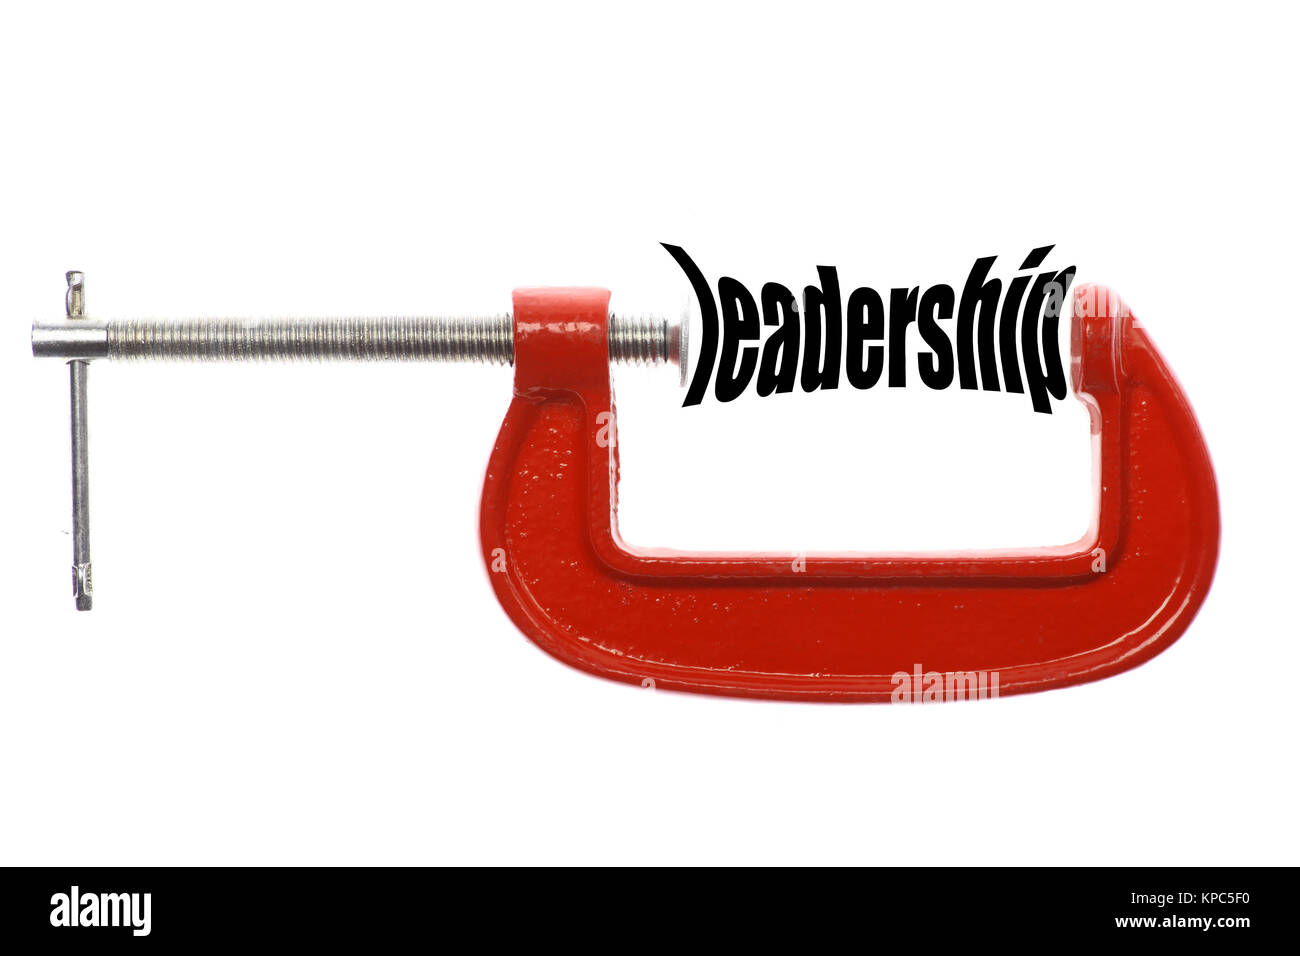 Compressed leadership concept Stock Photo